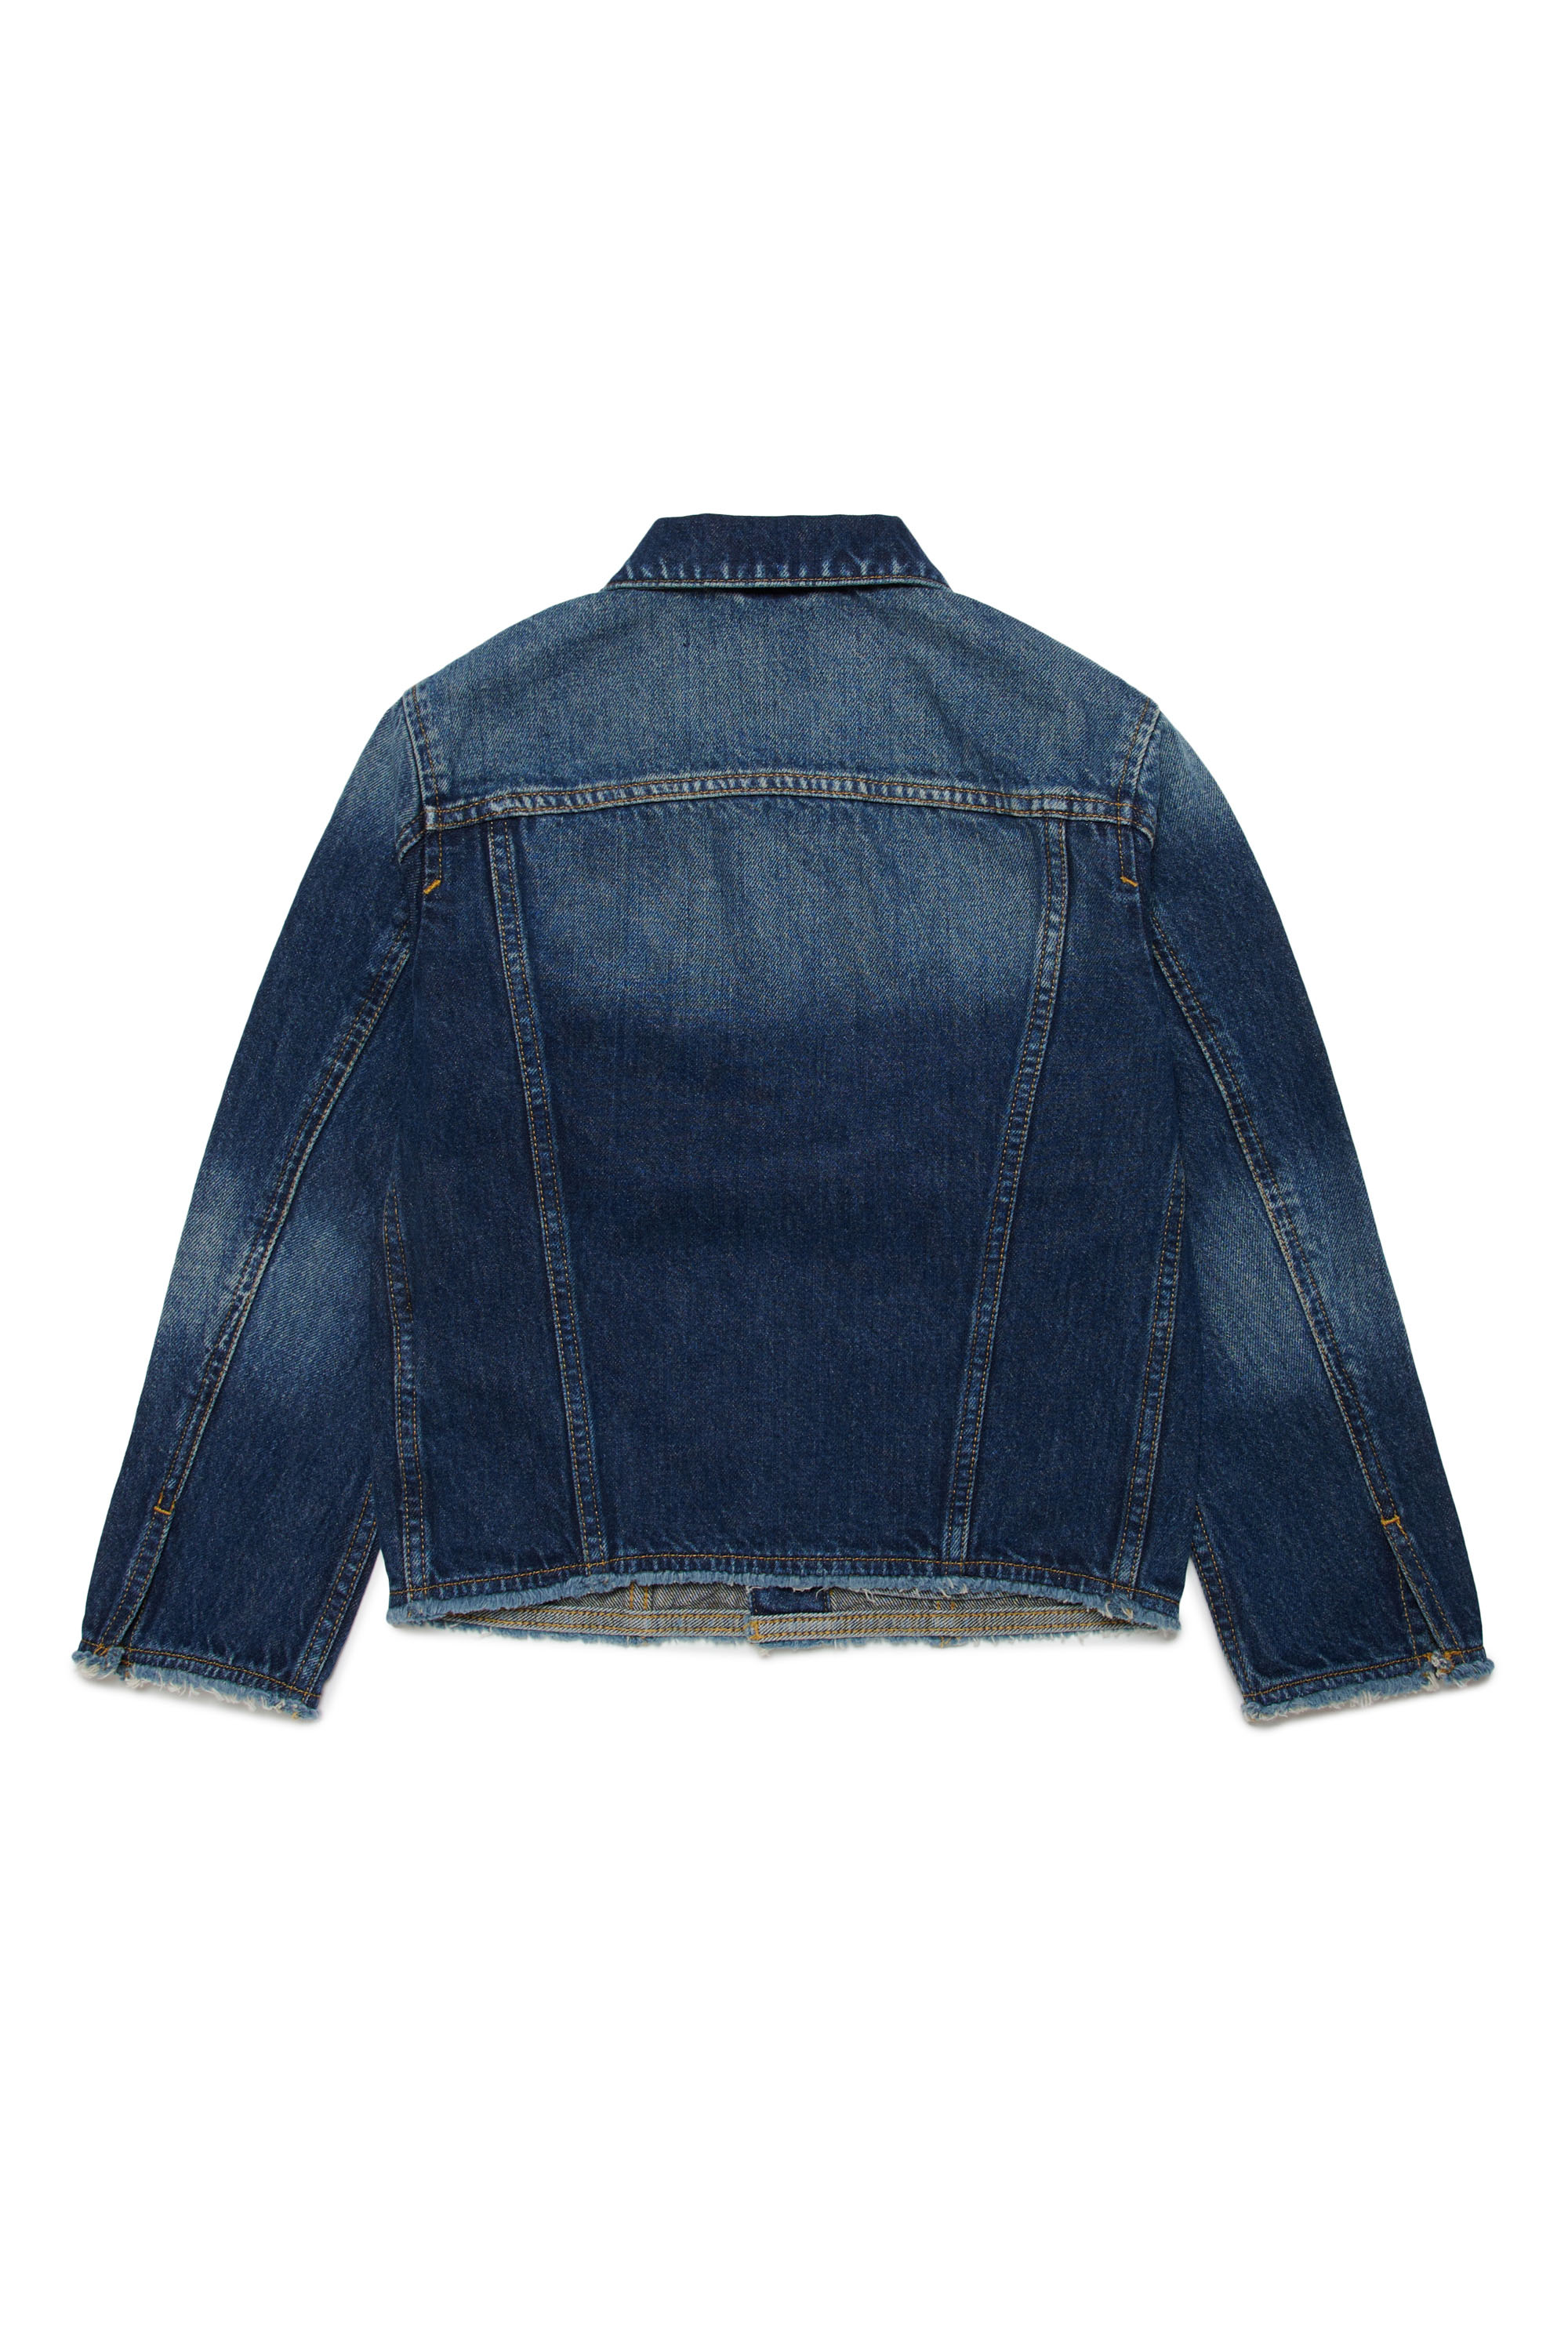 Diesel - JBARCY-J-S, Unisex Trucker jacket with frayed edges in Blue - Image 2